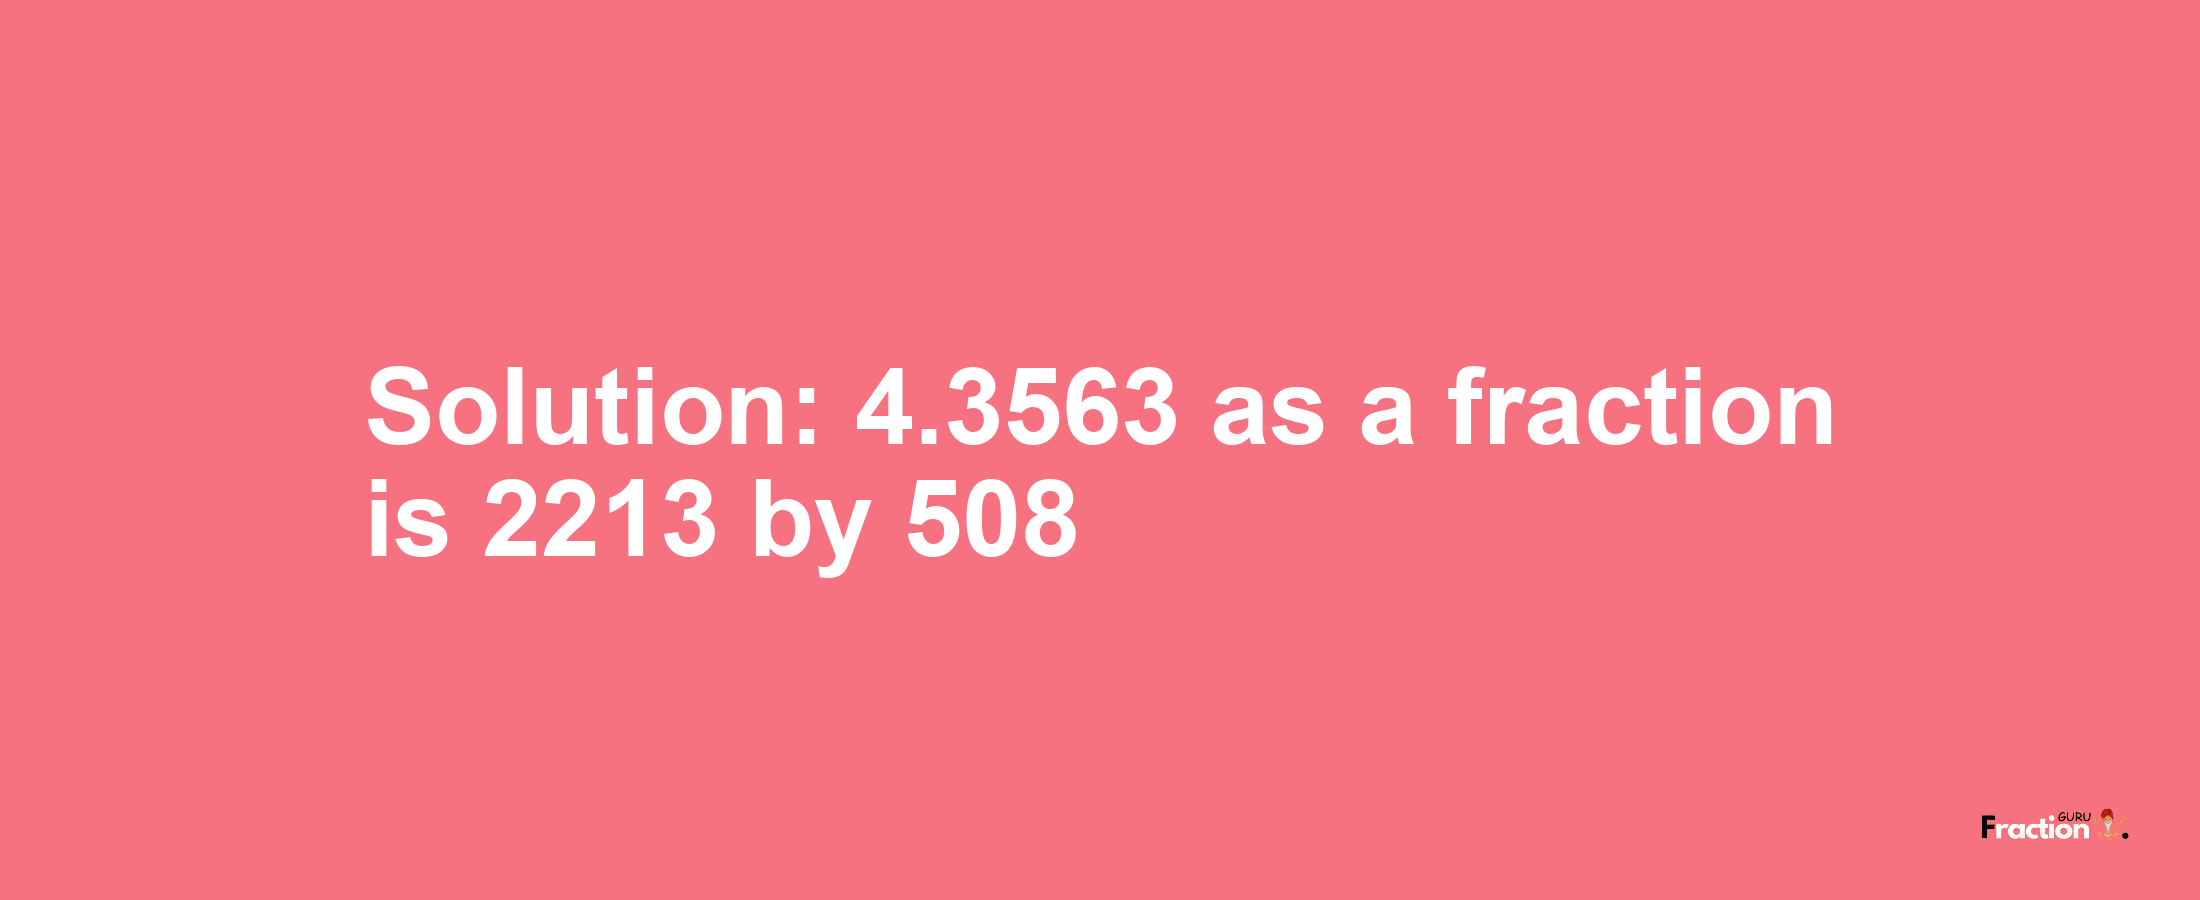 Solution:4.3563 as a fraction is 2213/508